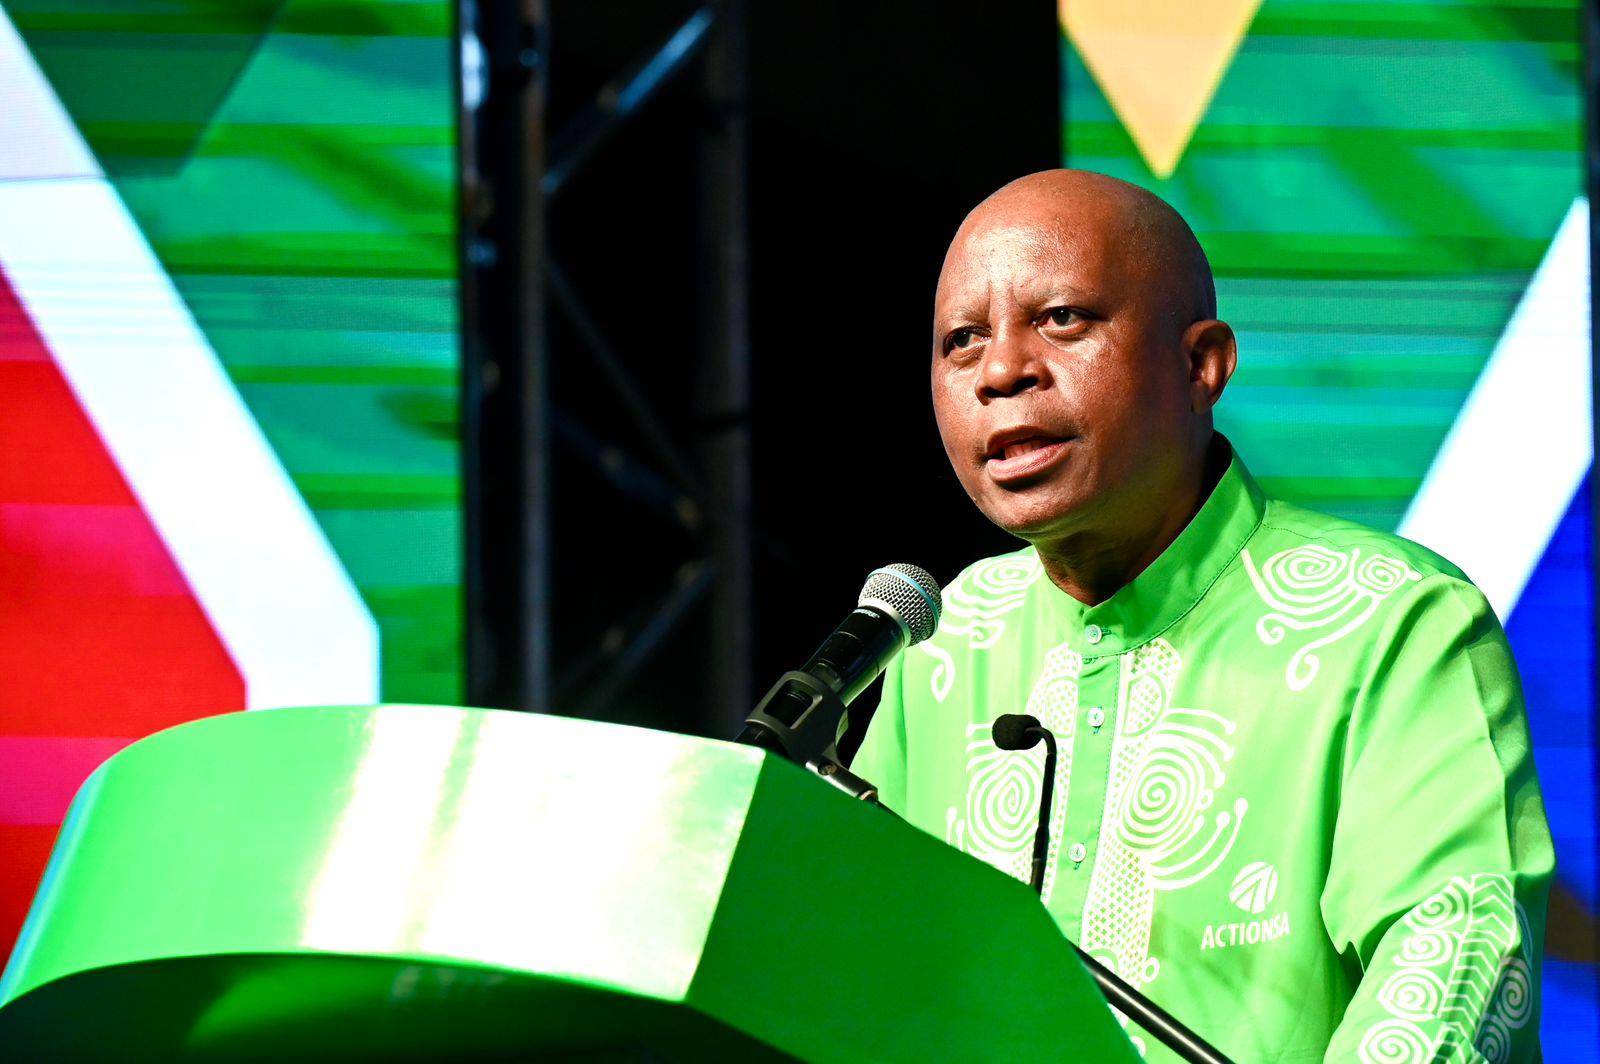 News24 | Mashaba unapologetic about plans to 'secure borders' as ActionSA launches manifesto 